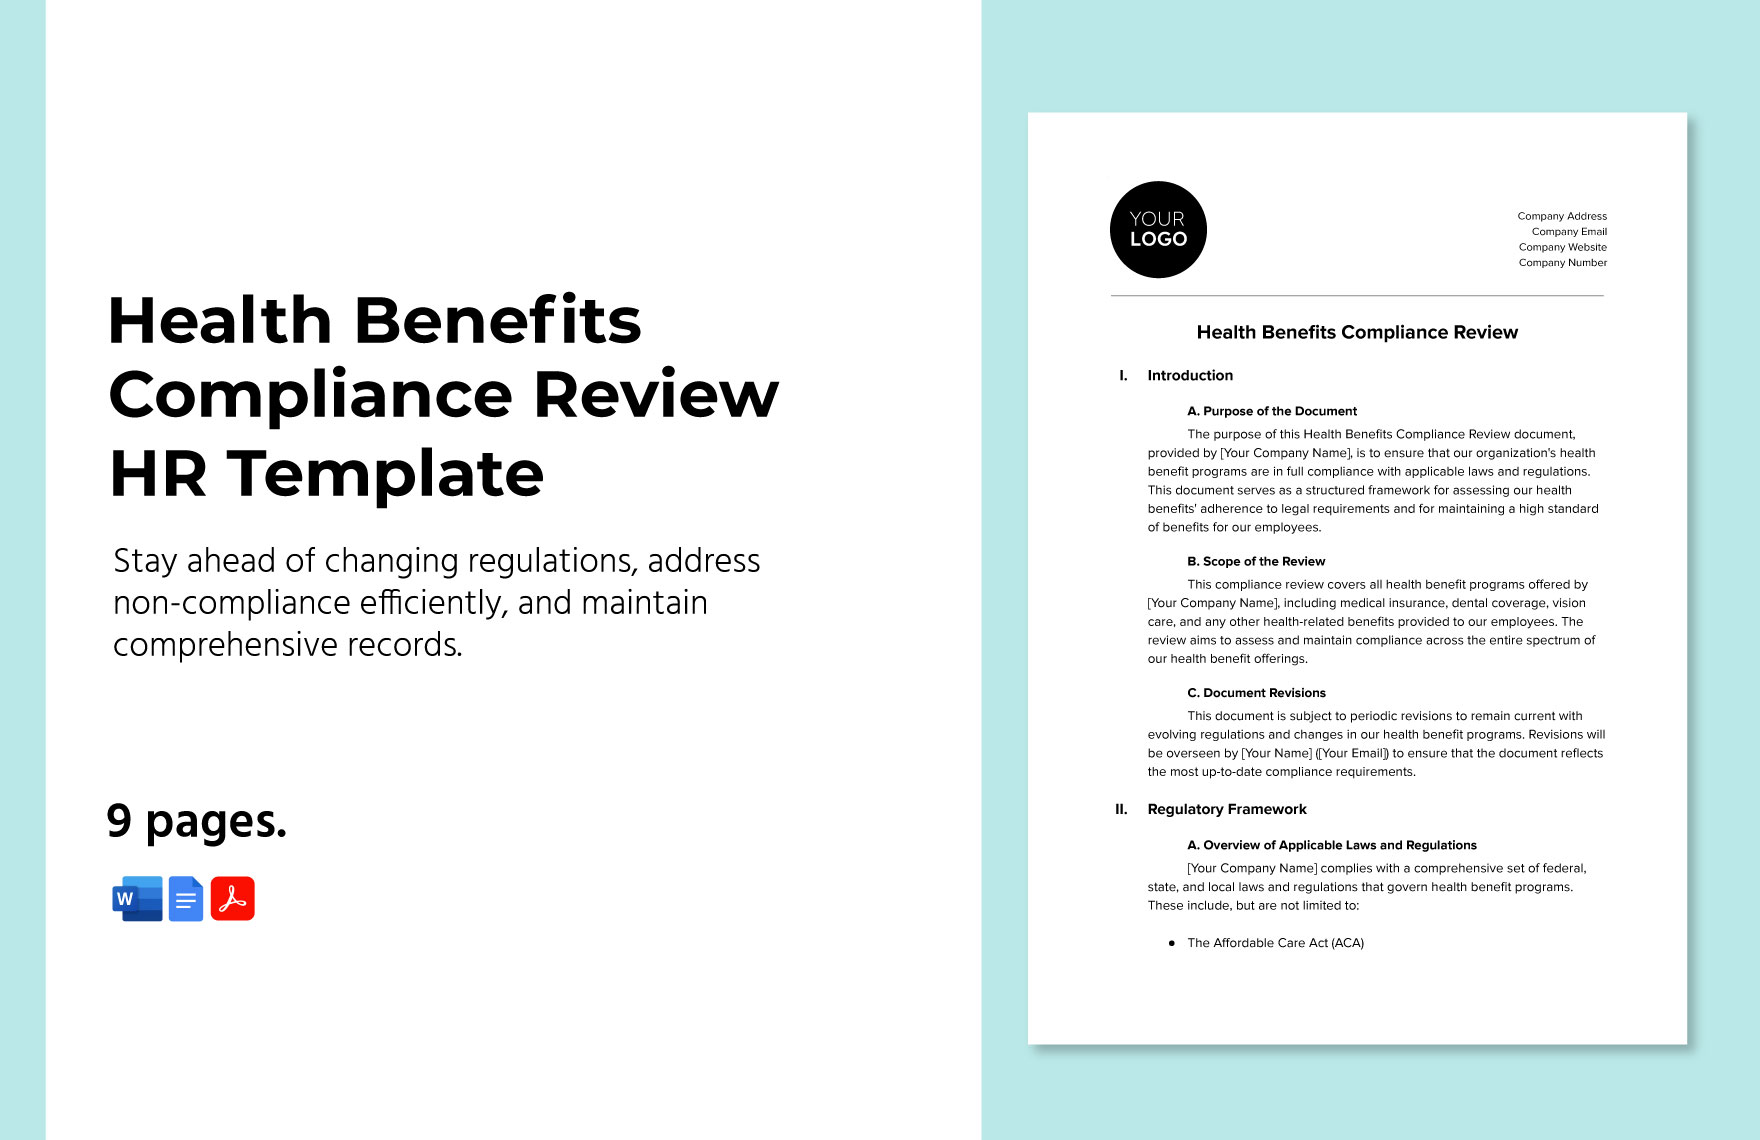 Employee Retention Legal Compliance Review HR Template in Word PDF